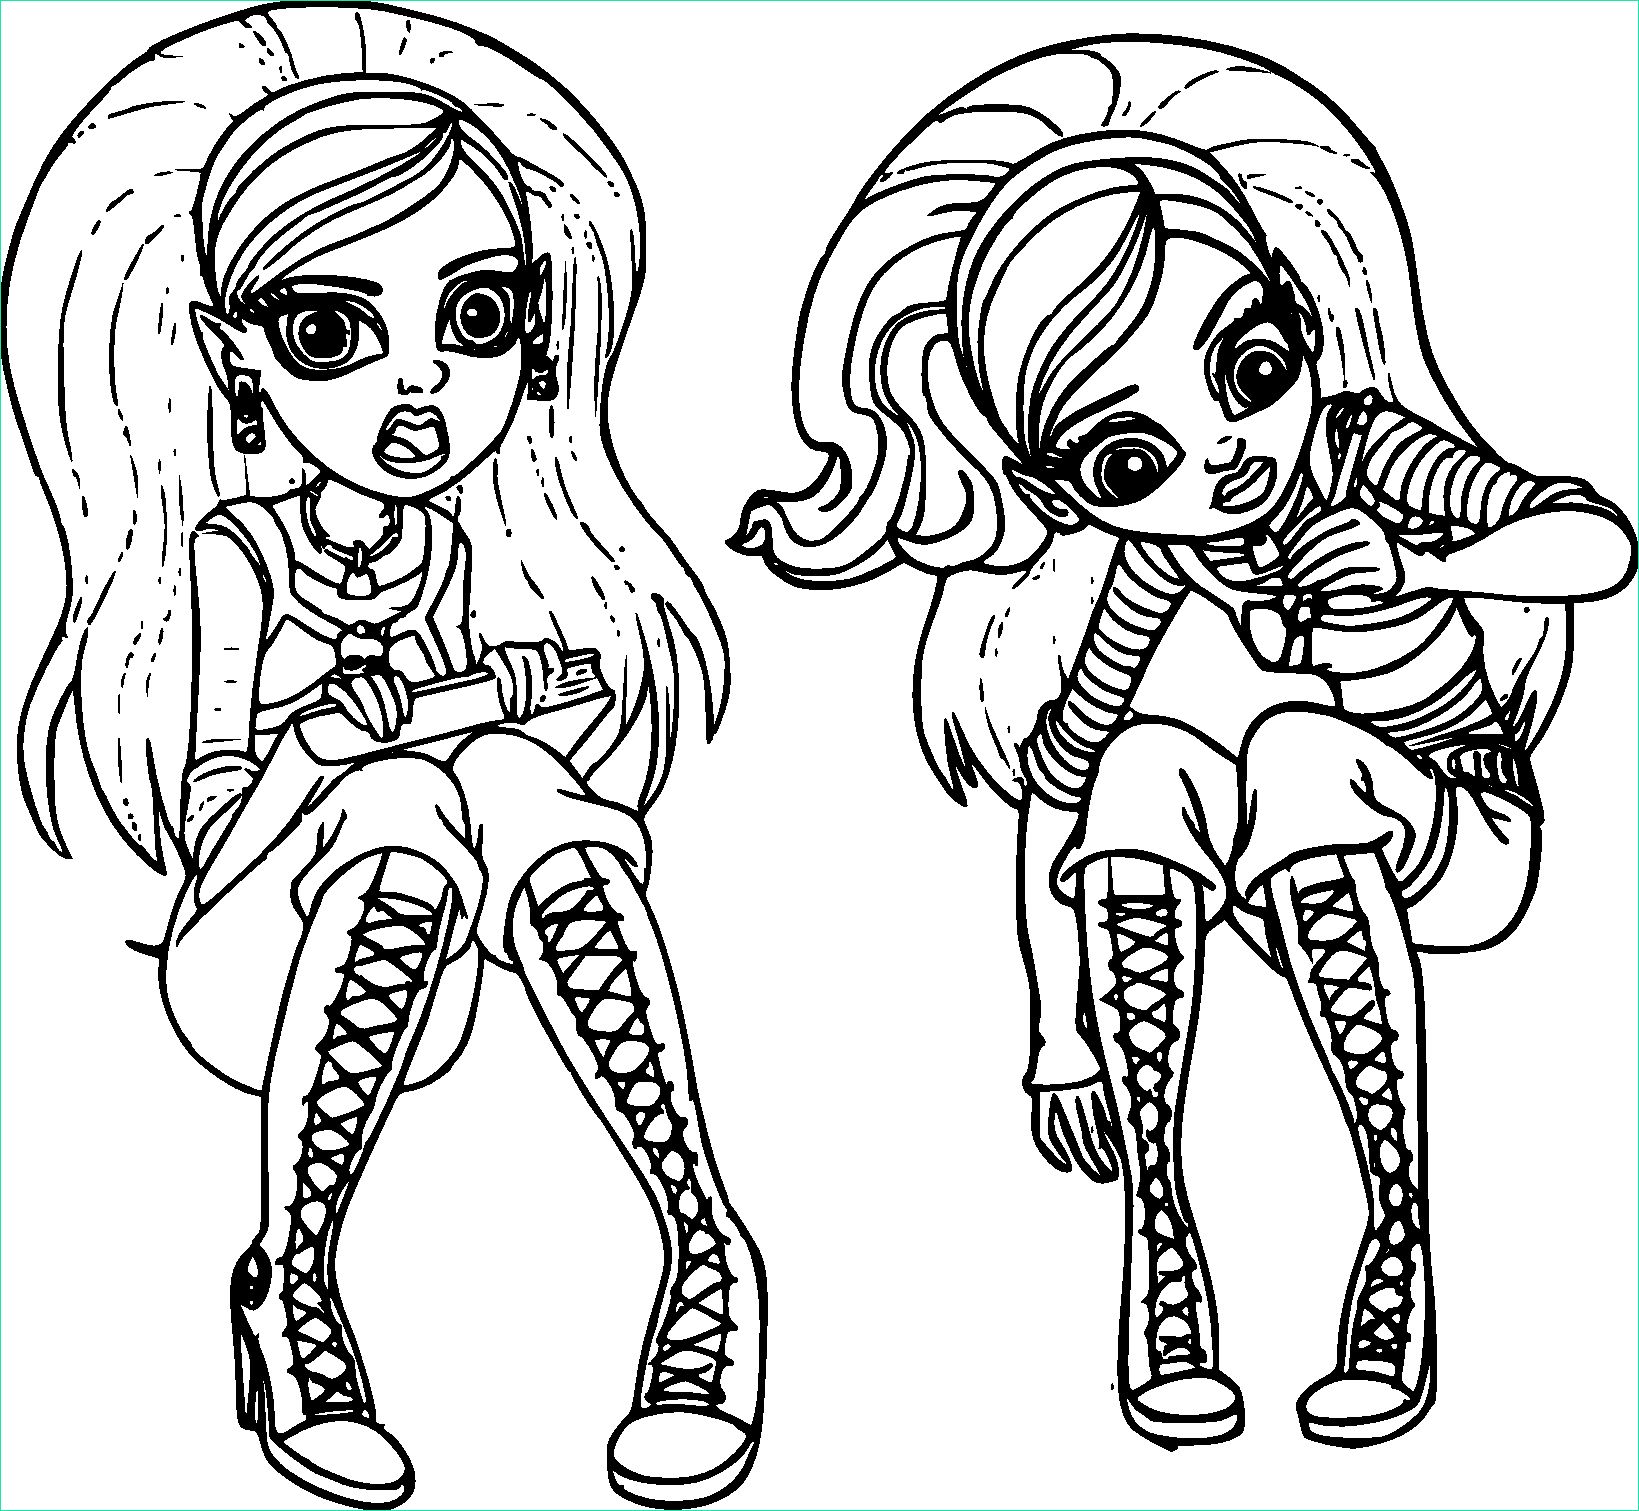 Coloriage Monster High Impressionnant Photographie Coloriage Monster High Ghoulia à Imprimer